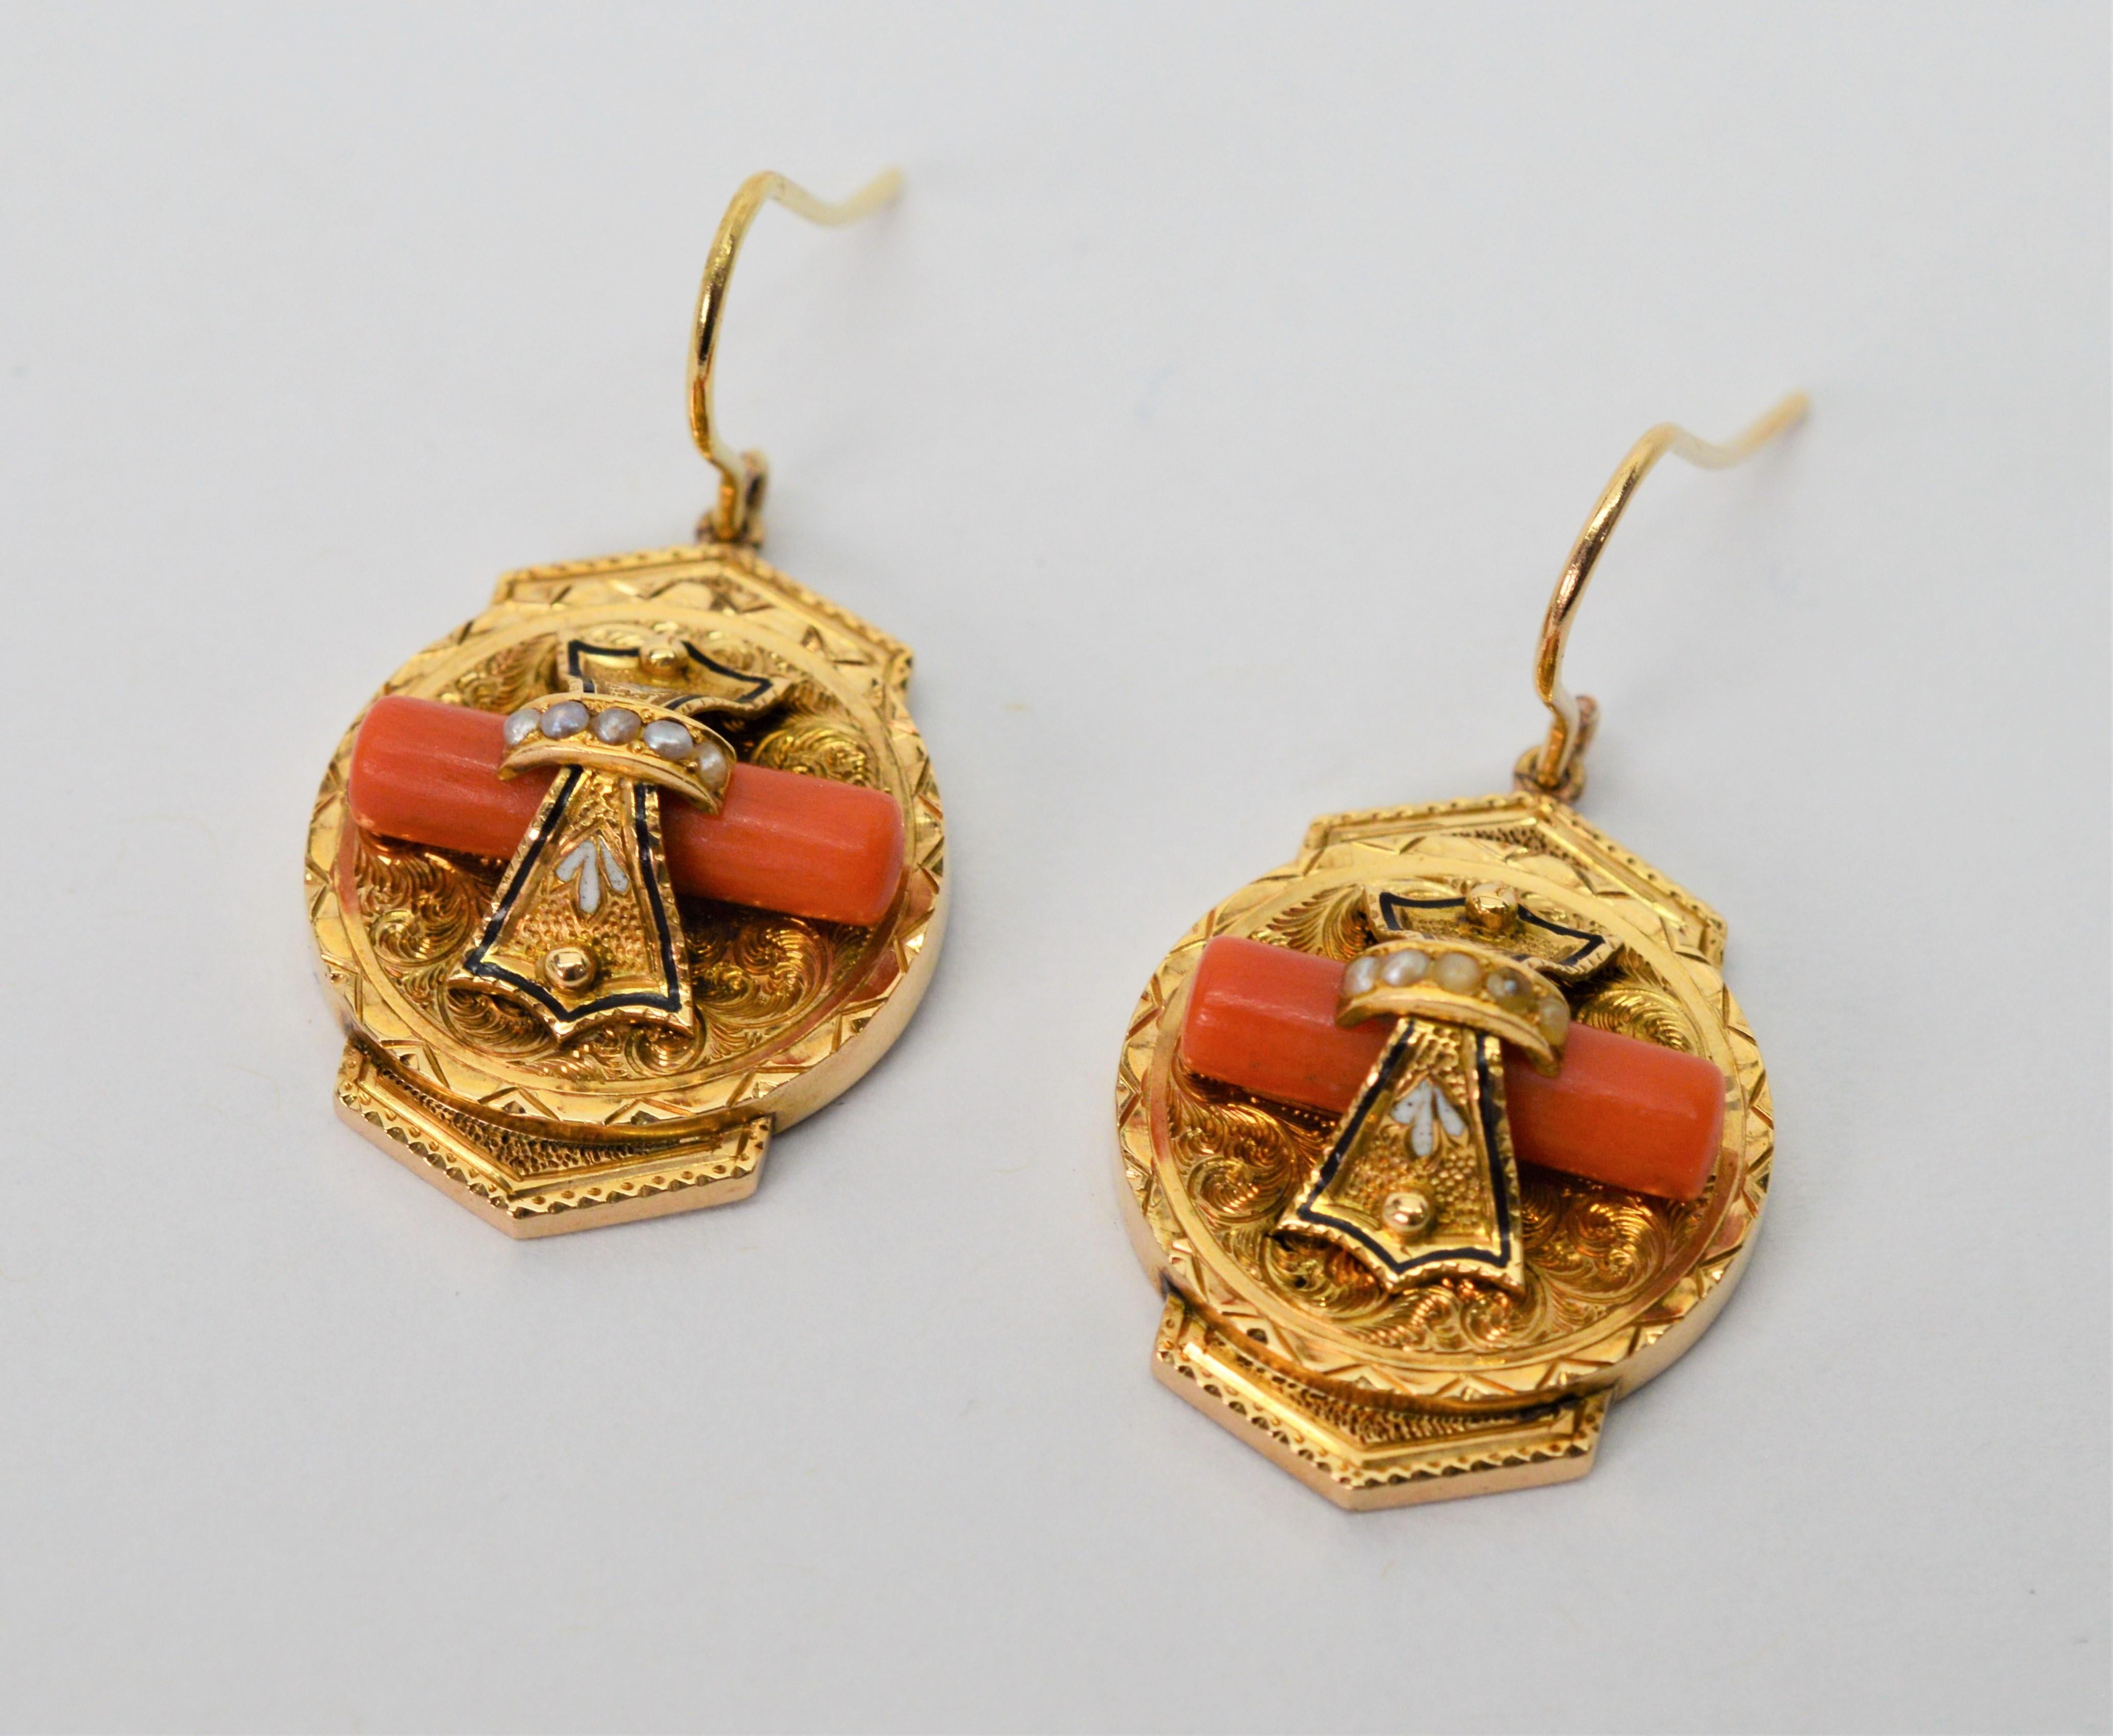 Natural coral, petite pearls and mother of pearl inlay adorn the facade of these ornately engraved medallion Victorian period earrings made of fourteen carat 14K yellow gold. Rare, three dimensional design and laden with artful eye-catching details,